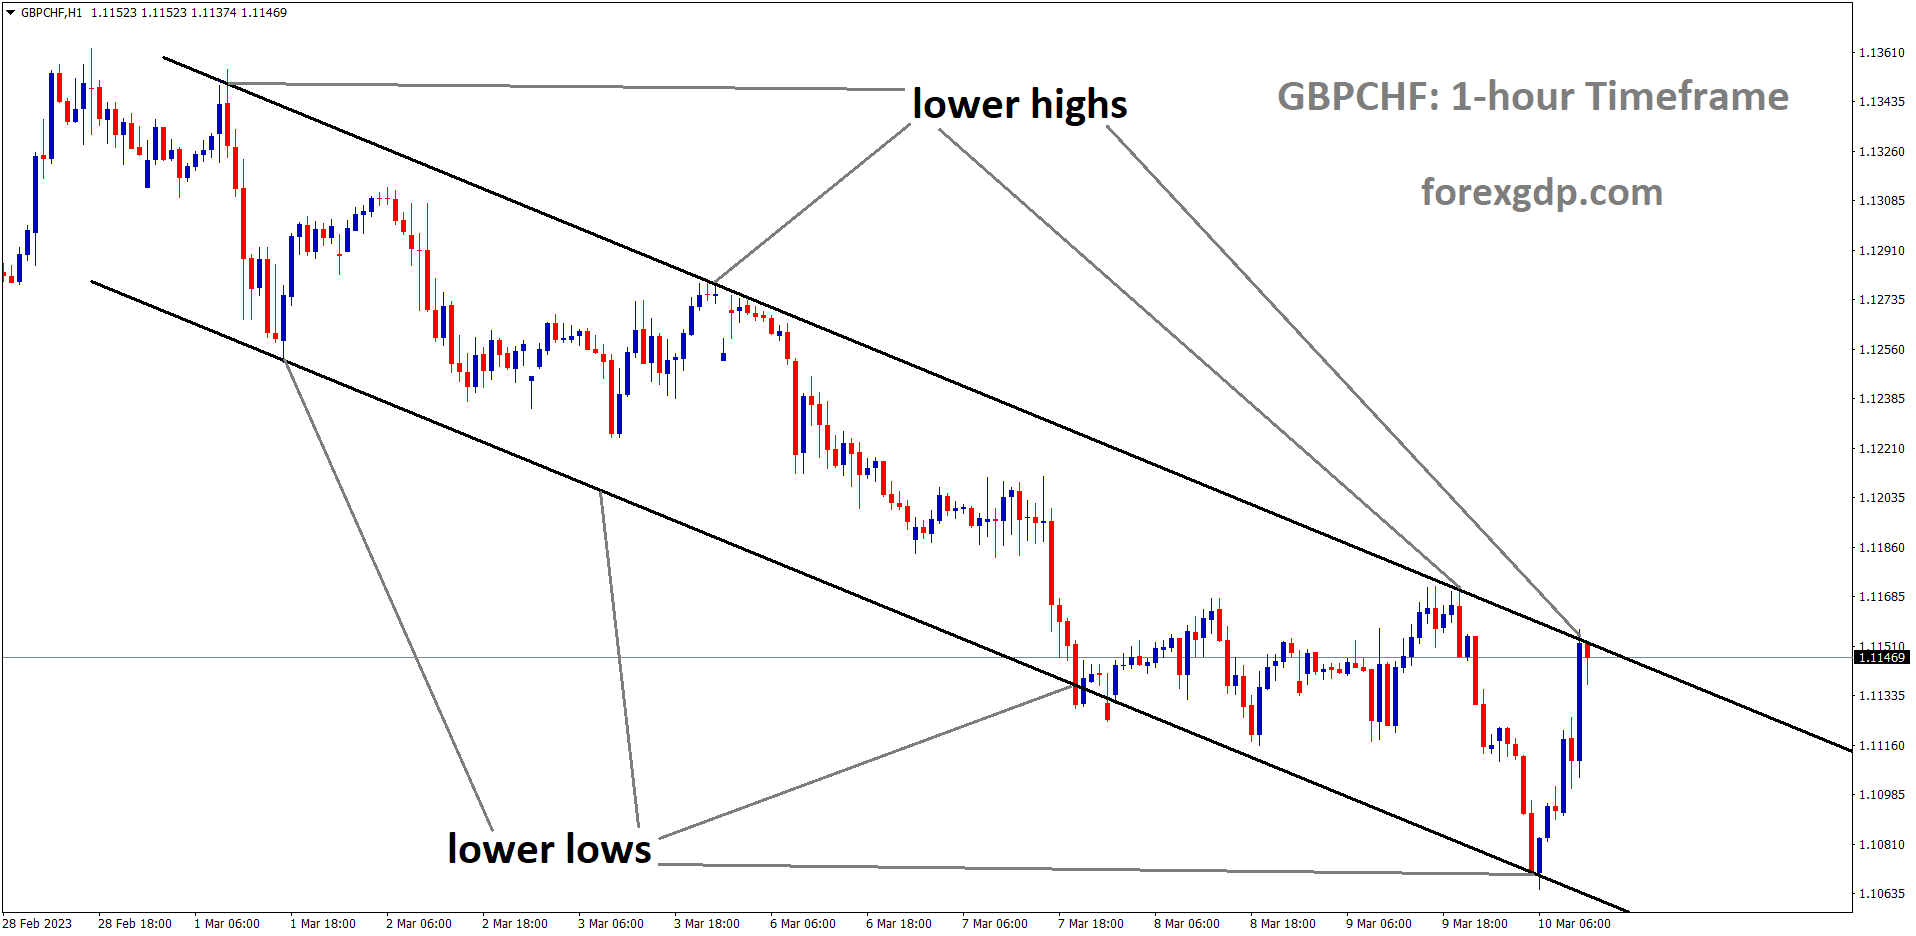 GBPCHF is moving in Descending channel and the market has reached the lower high area of the channel.